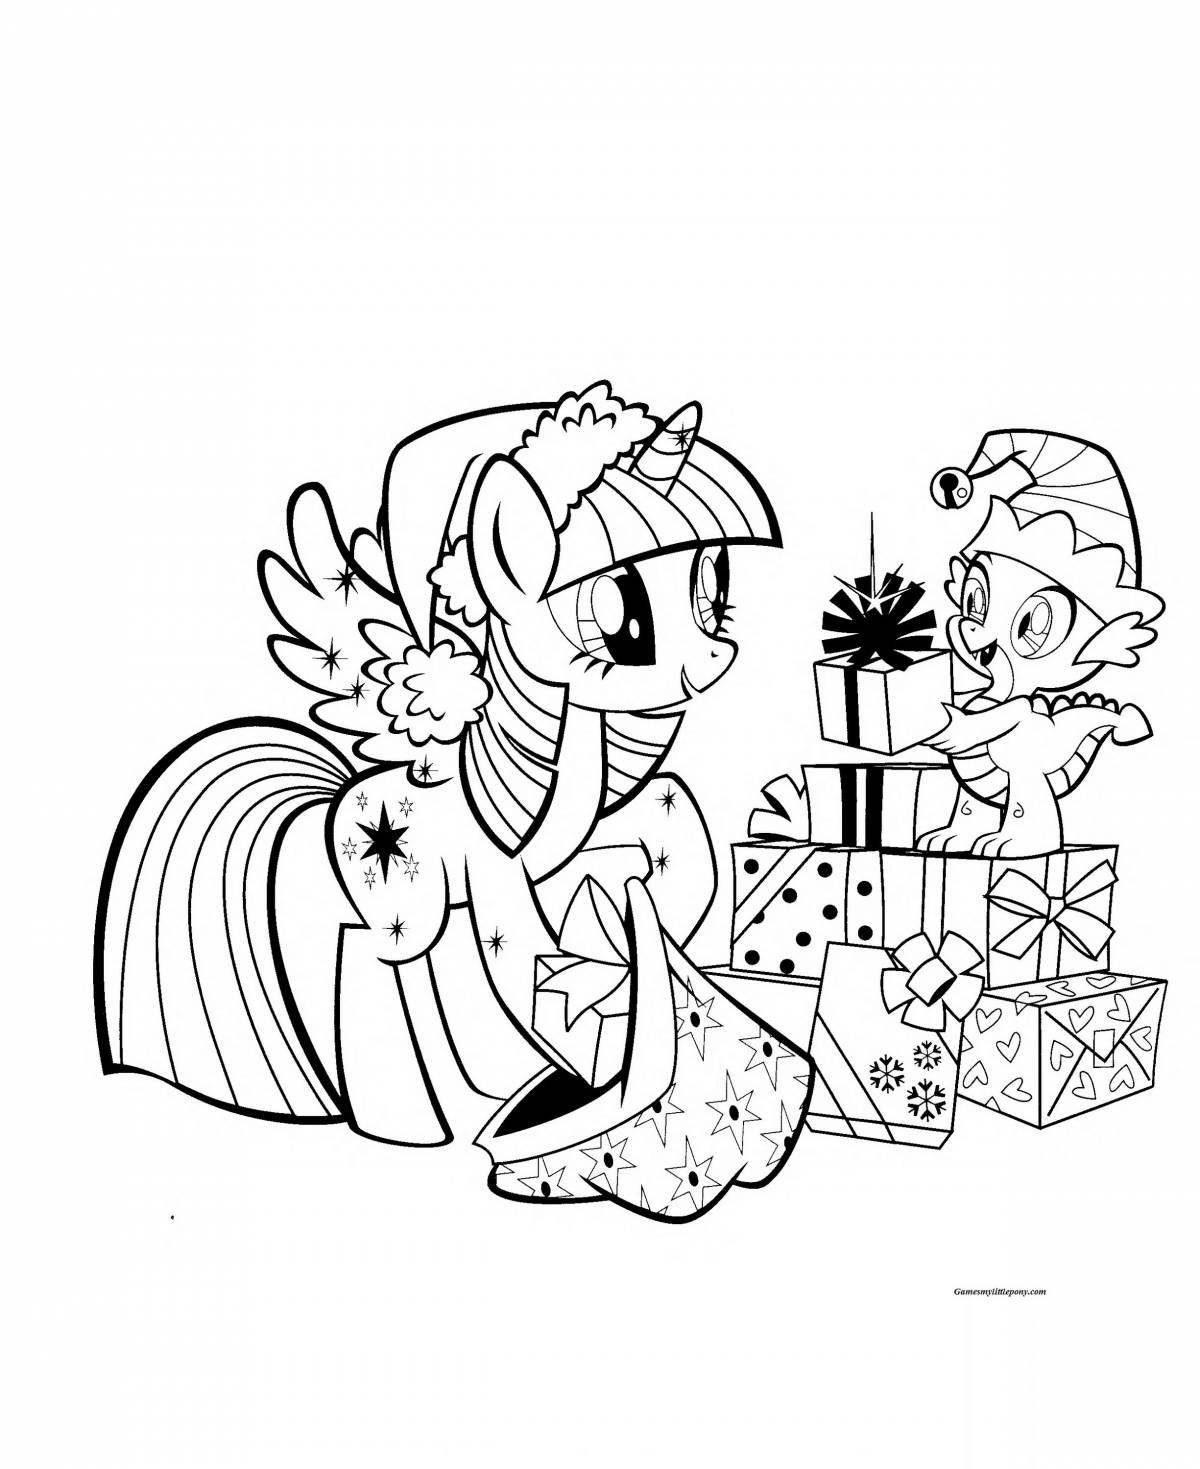 Coloring game time sparkle and her friends